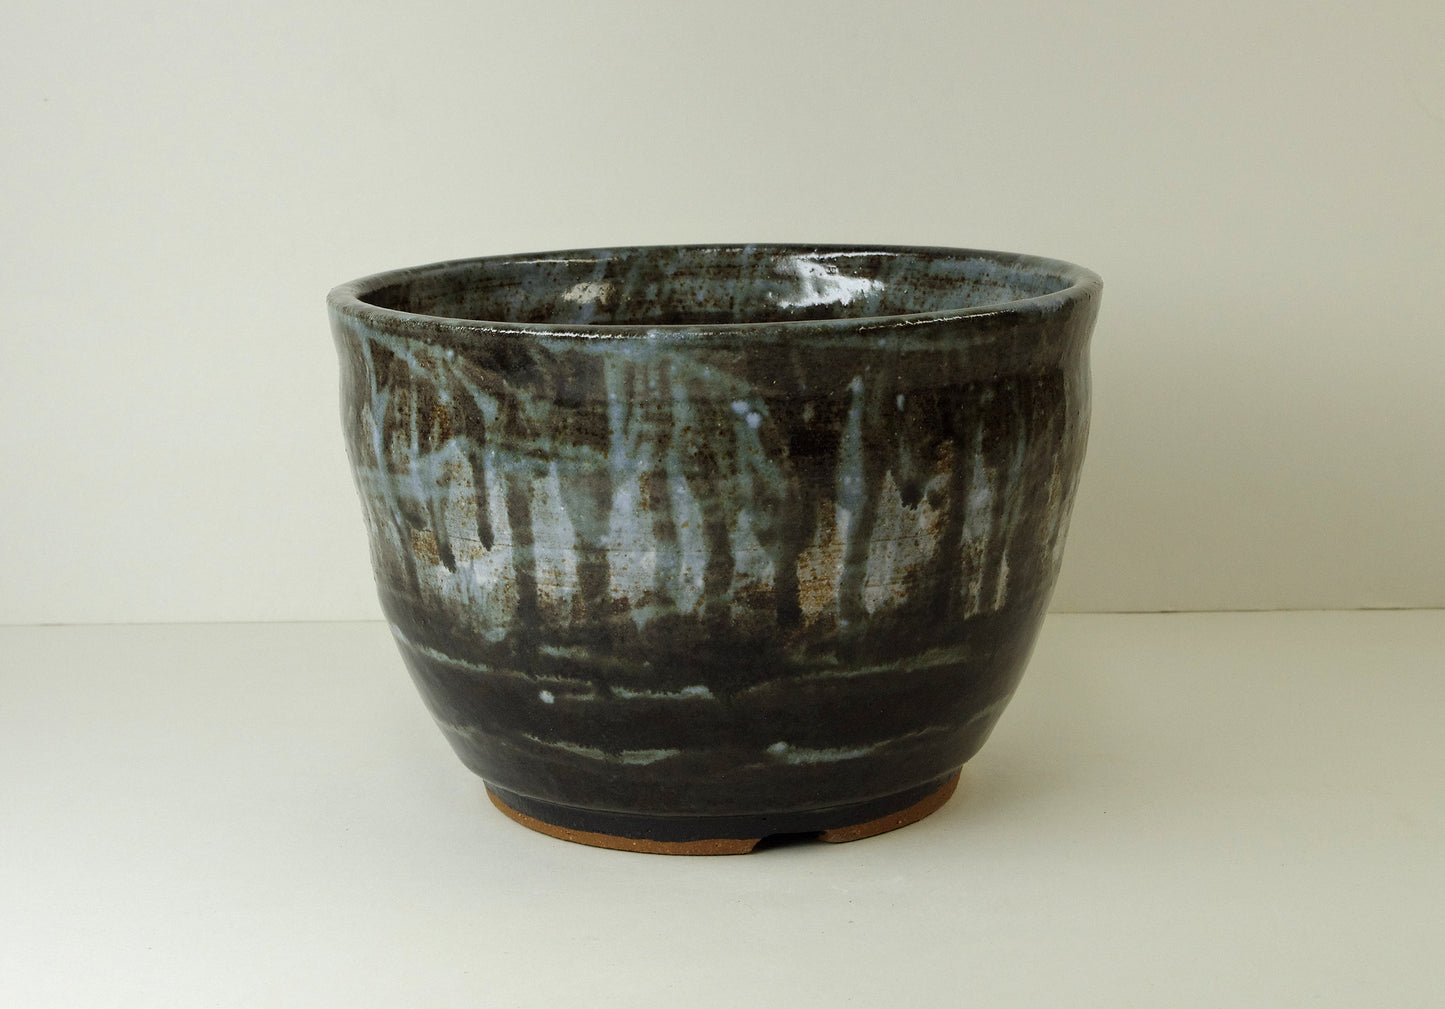 12099, Hand Thrown Stoneware Bonsai Pot,  Black  6 1/2 x 4 3/8, With Extra Wire Holes